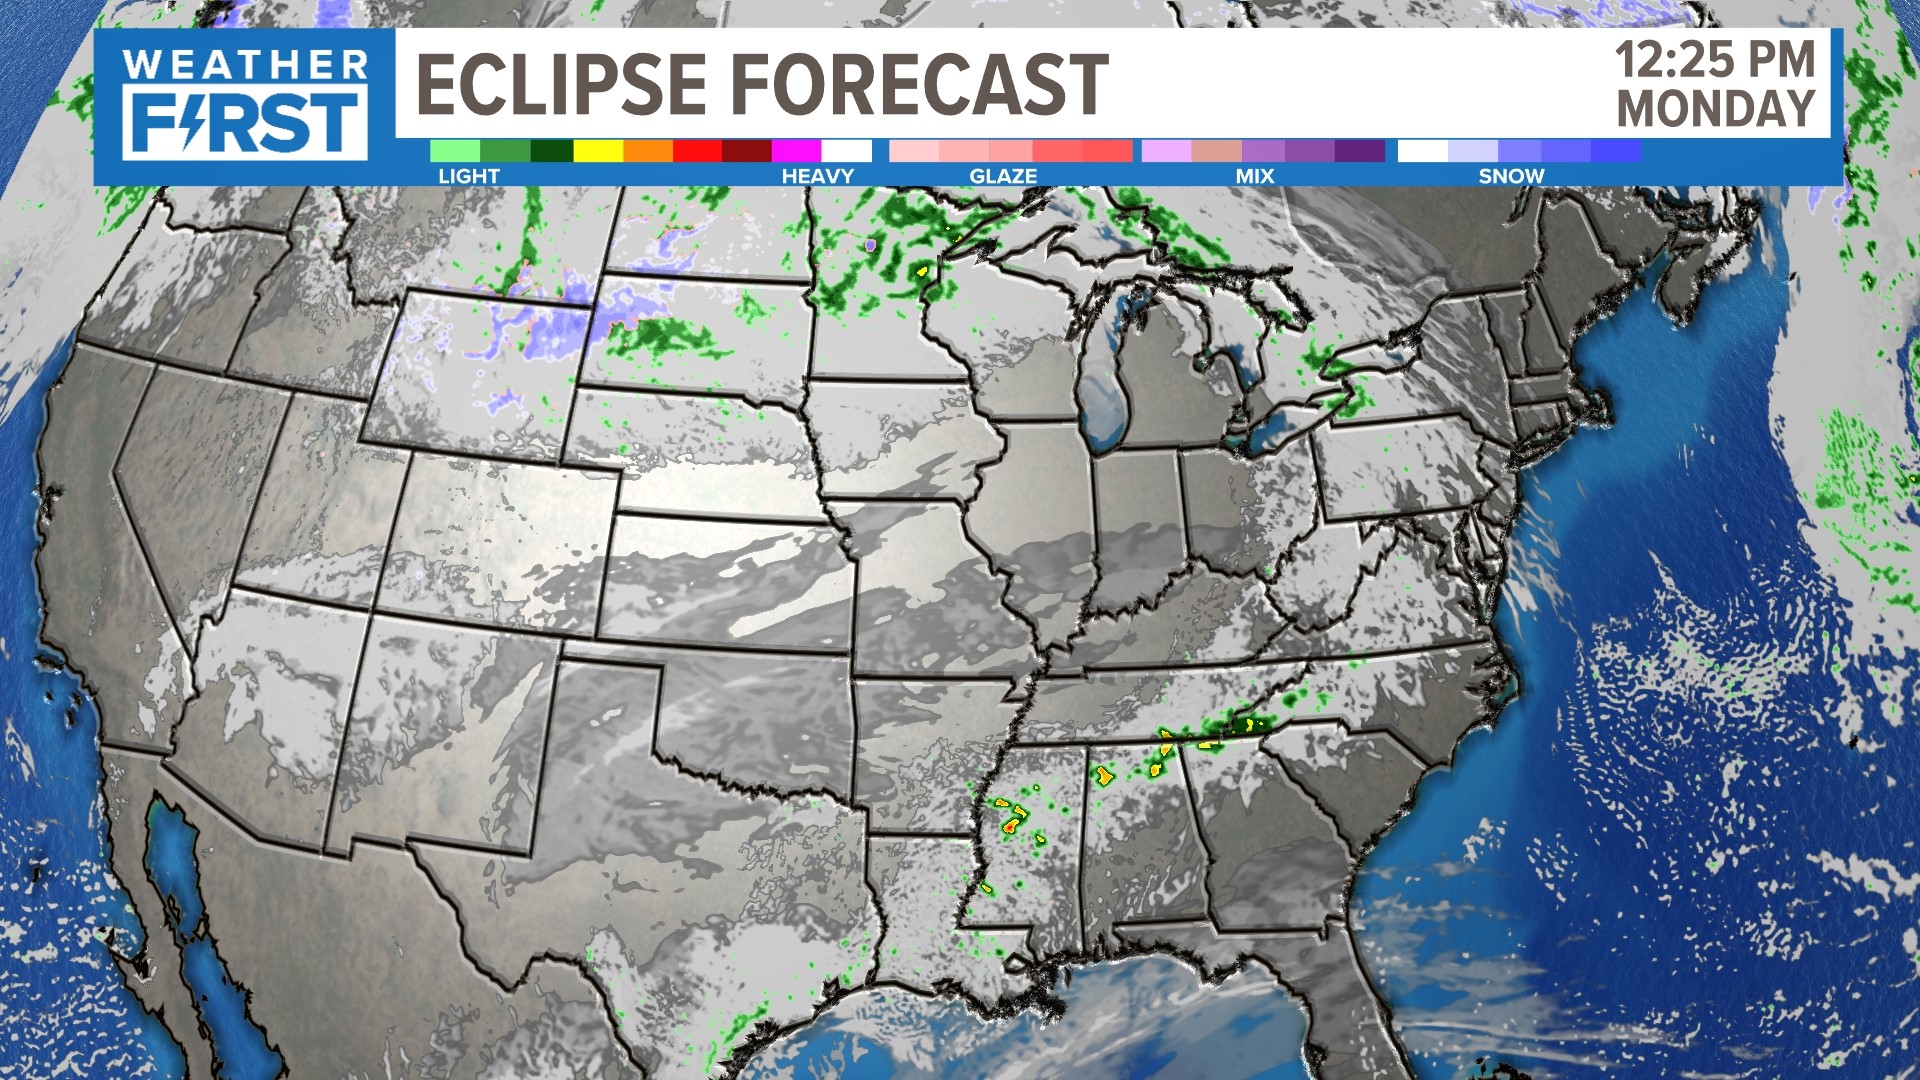 Nationwide cloud forecast for eclipse Monday